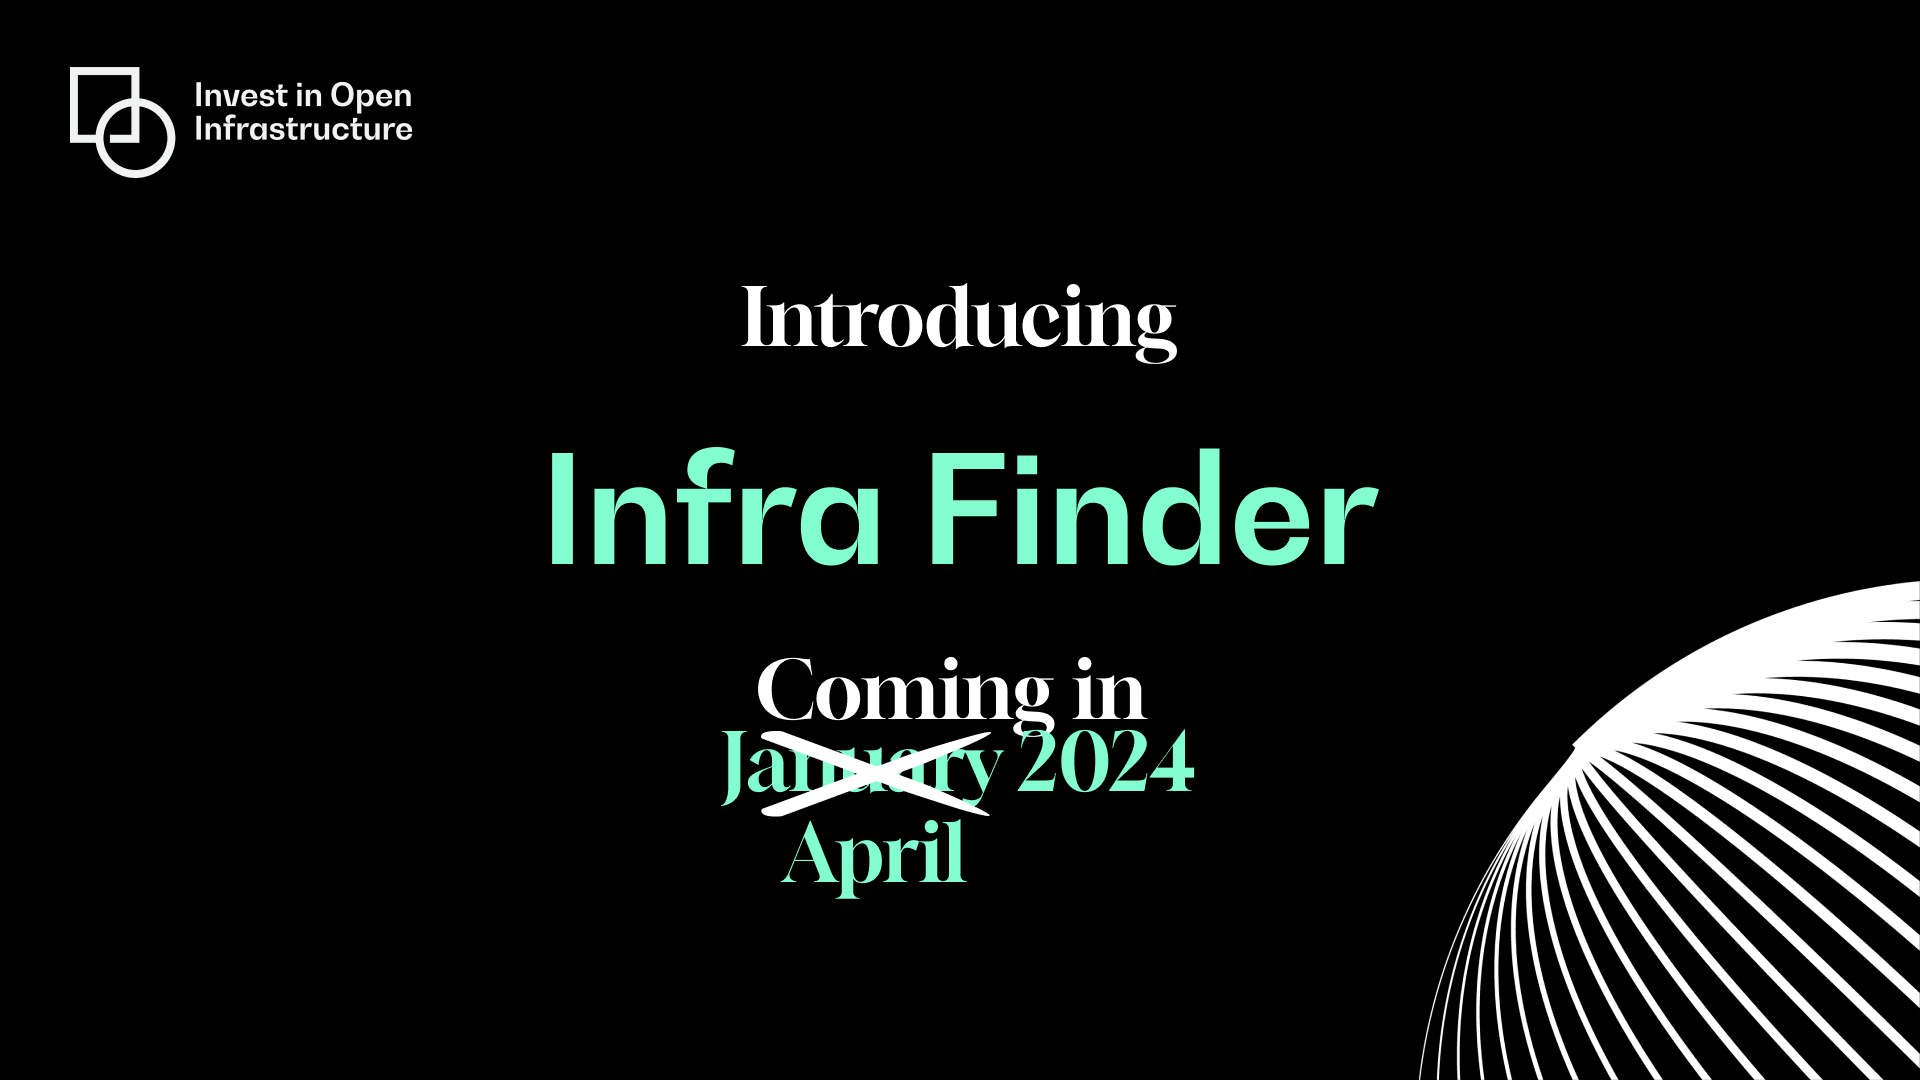 Mint text on a black background says: Introducing Infra Finder, "Coming in January 2024". January is scratched out and replaced with "April". 